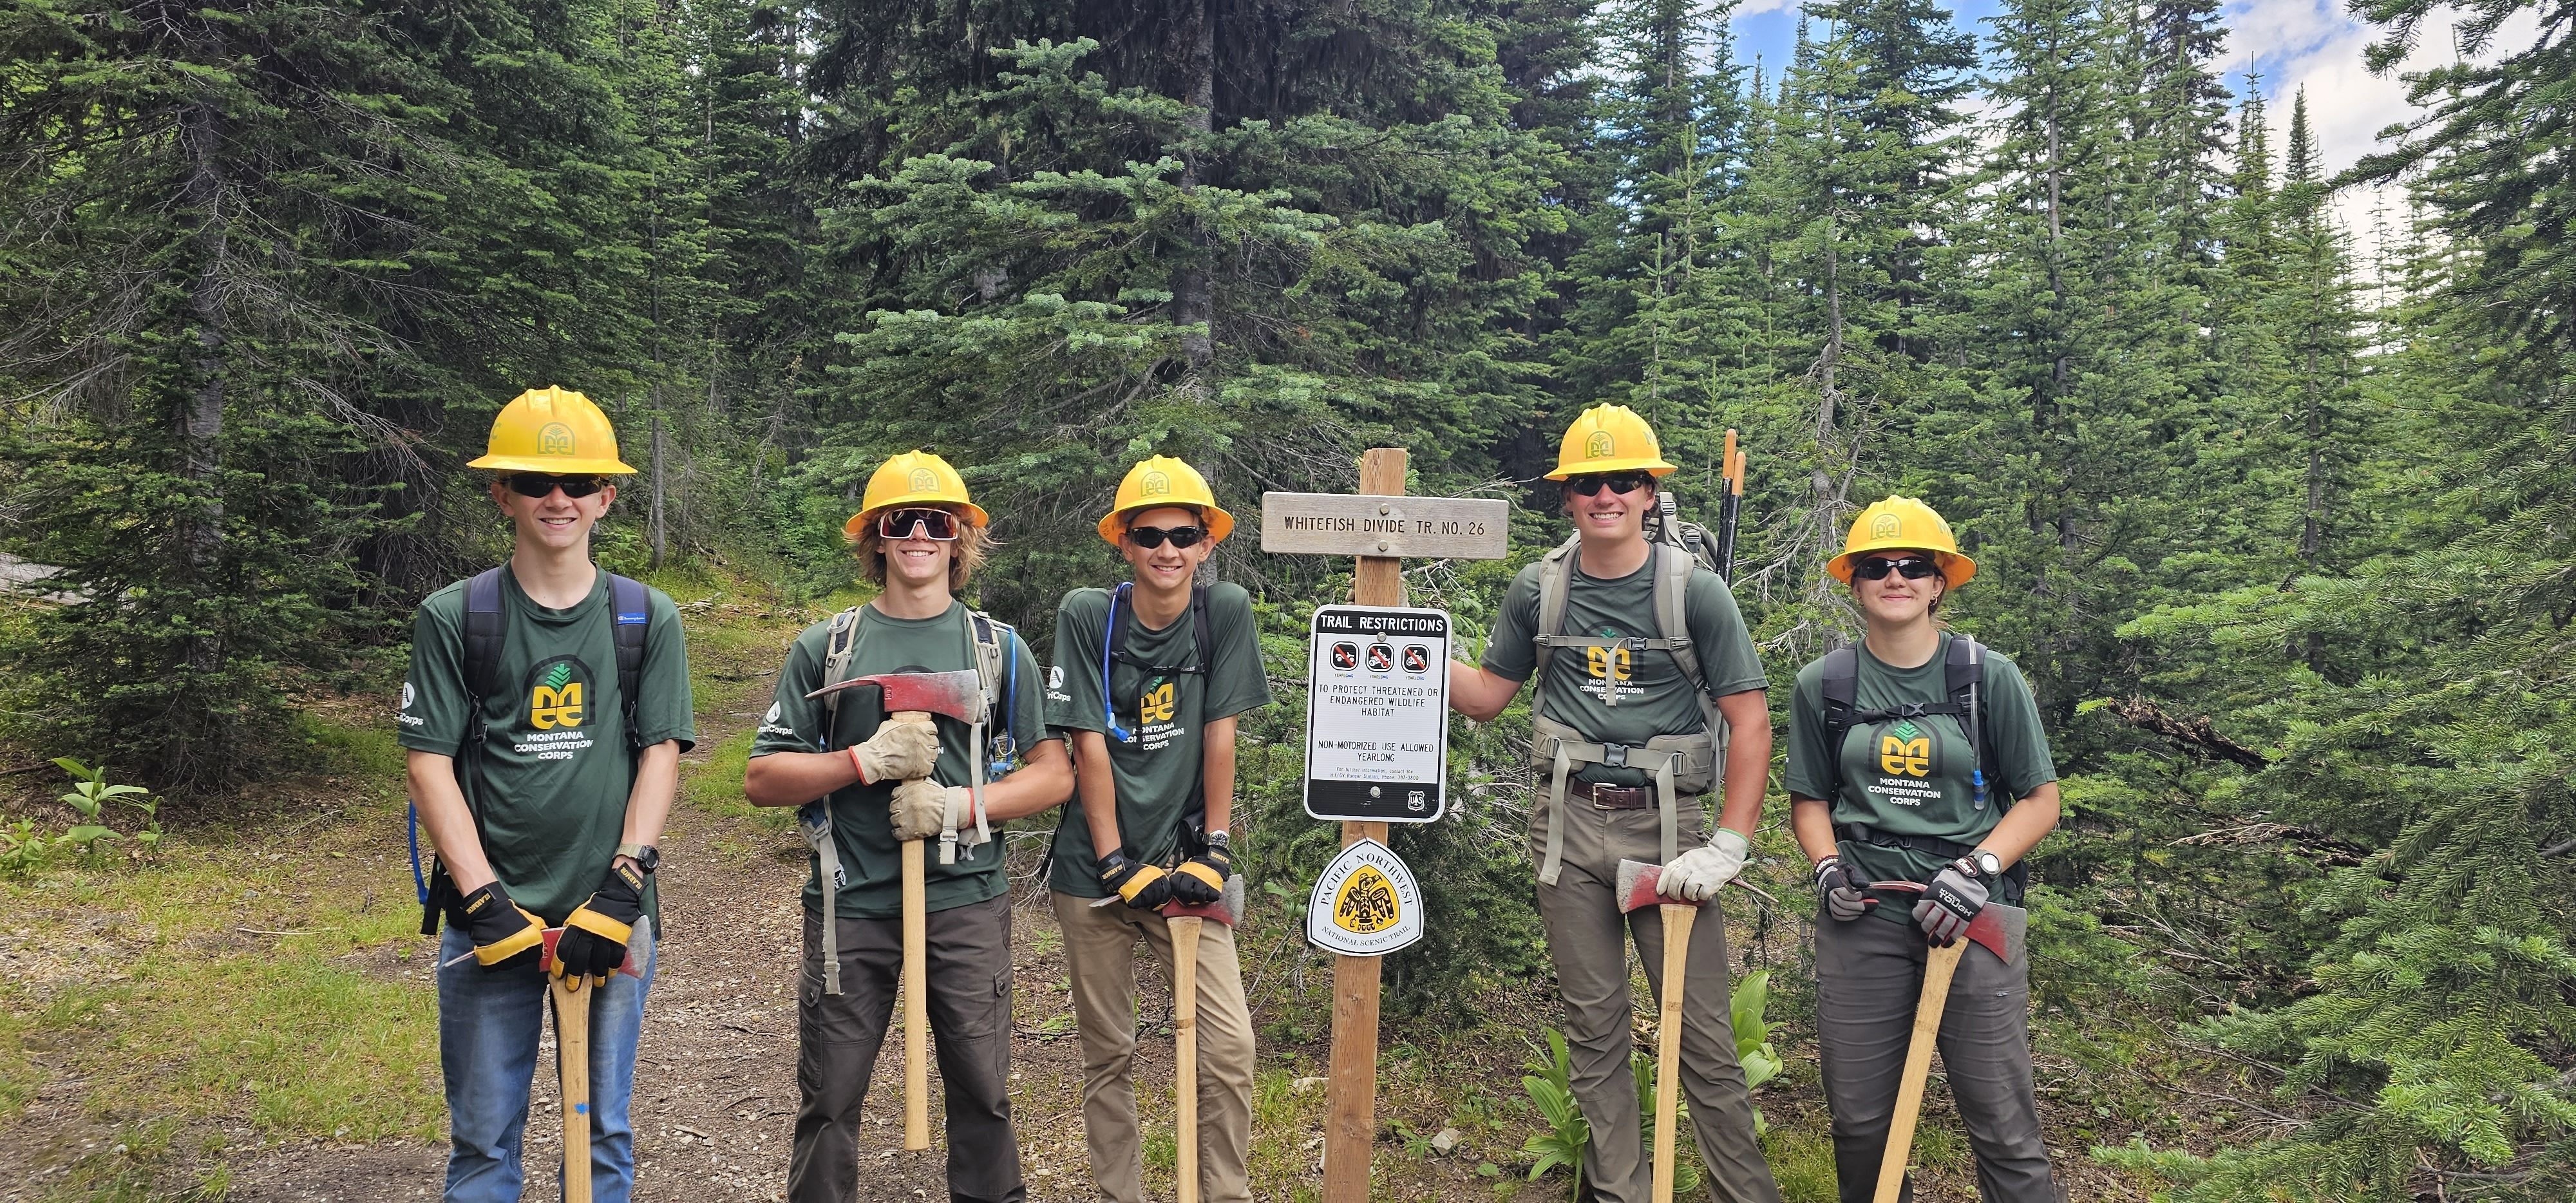 A youth crew stands smiling next to a trail sign